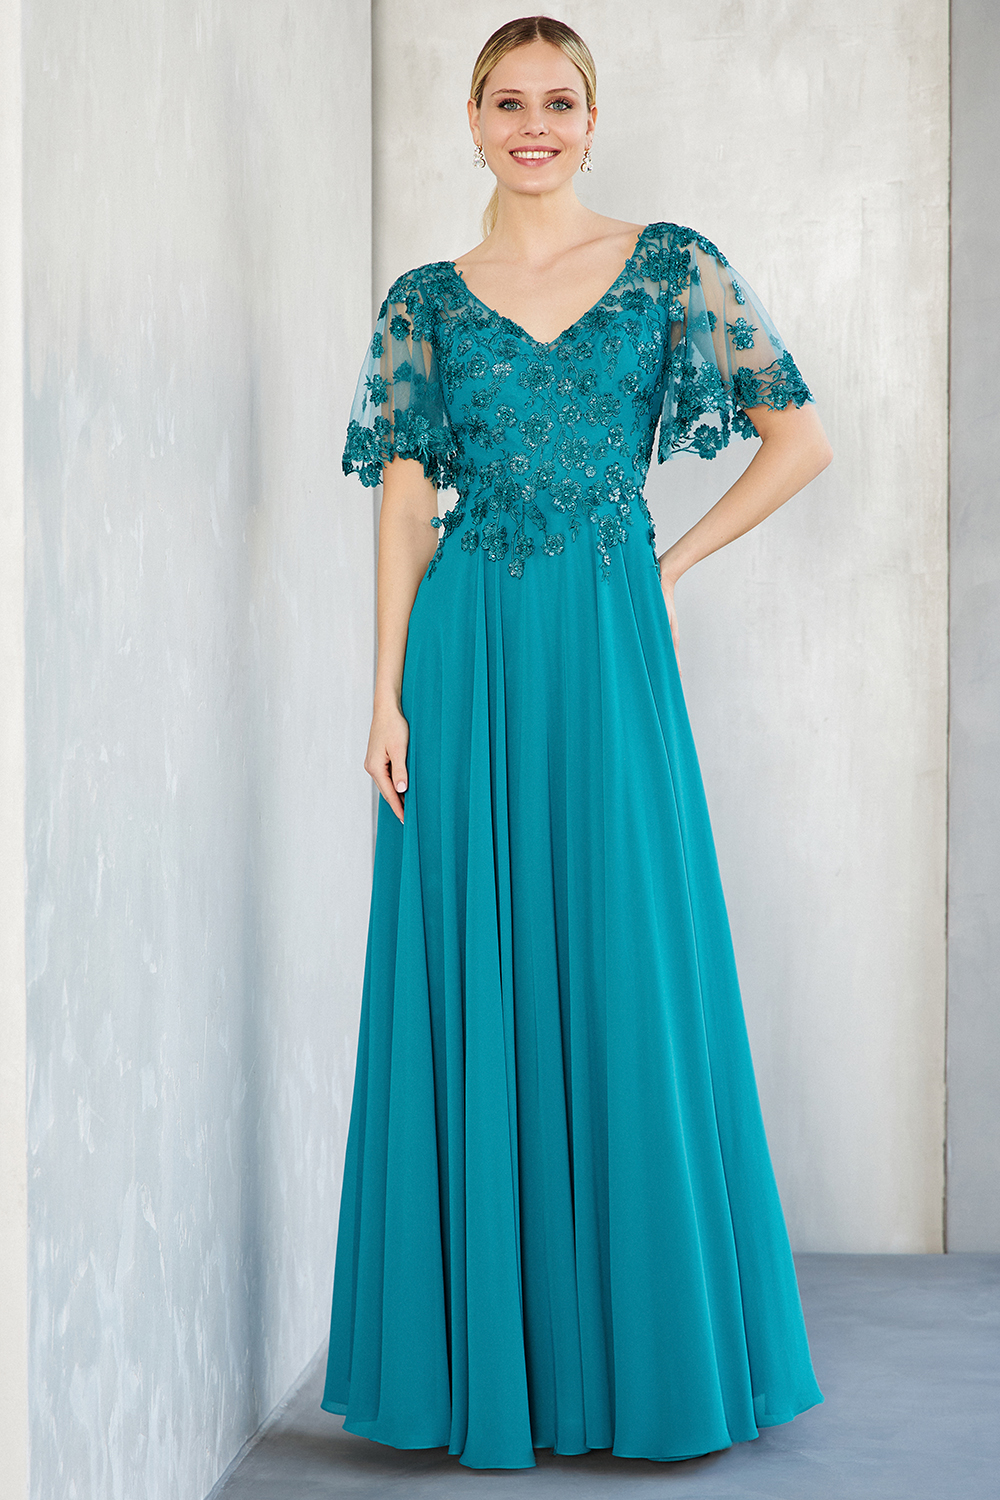 Classic Dresses / Long evening chiffon dress with lace top and long sleeves for the mother of the bride